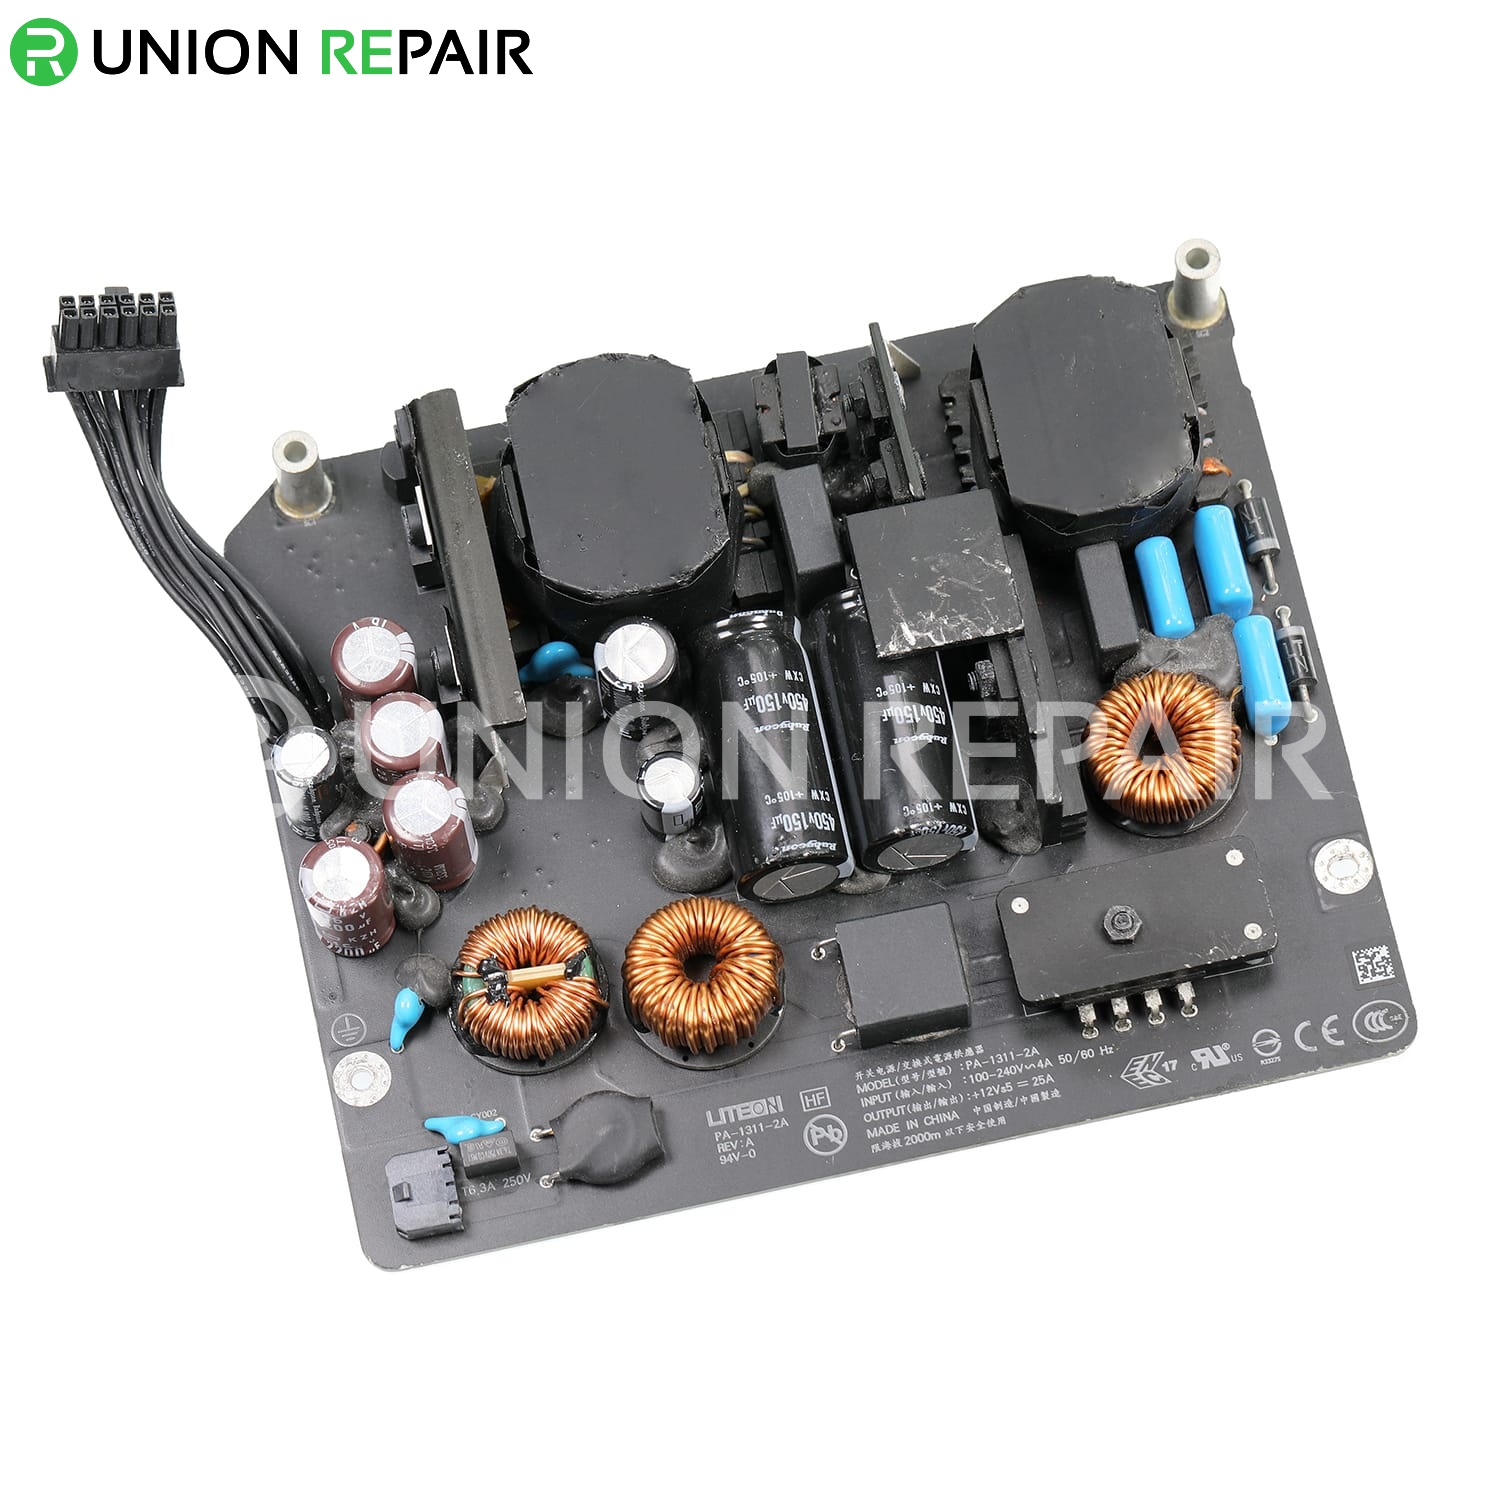 Power Supply (300W) for iMac 27